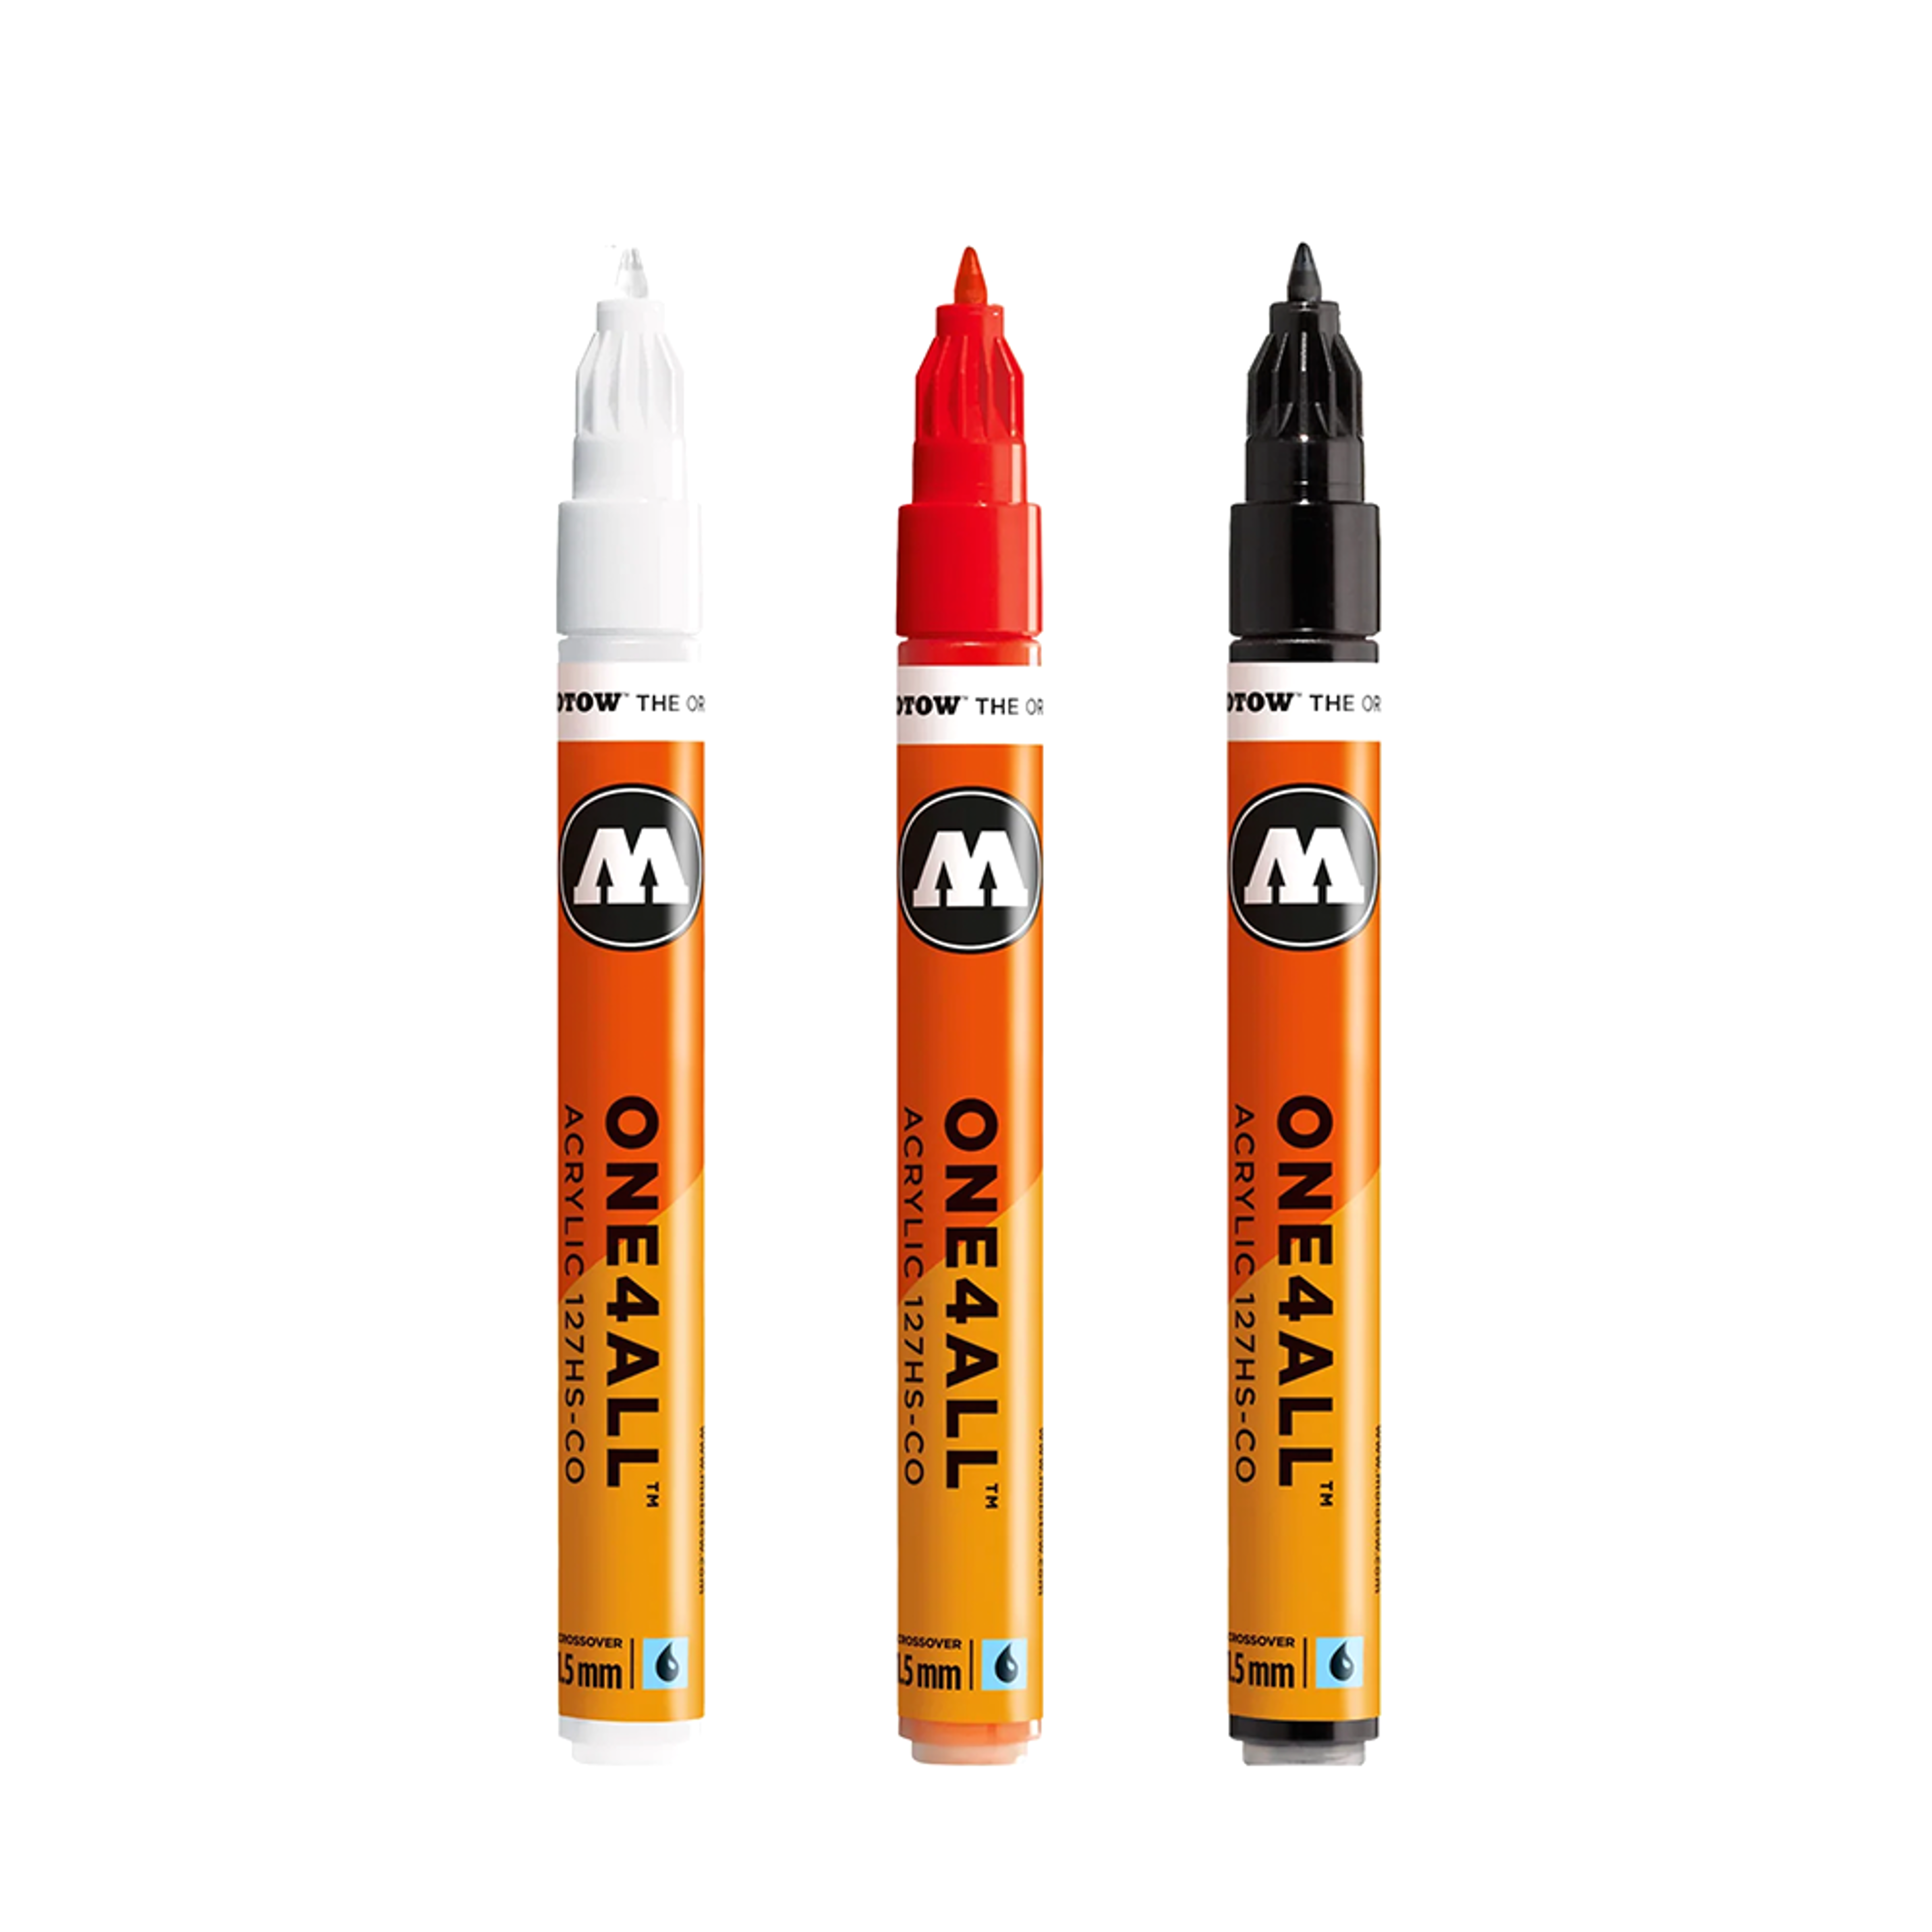 Molotow ONE4ALL 127HS-EF Acrylic Paint Marker 1mm Signal Black